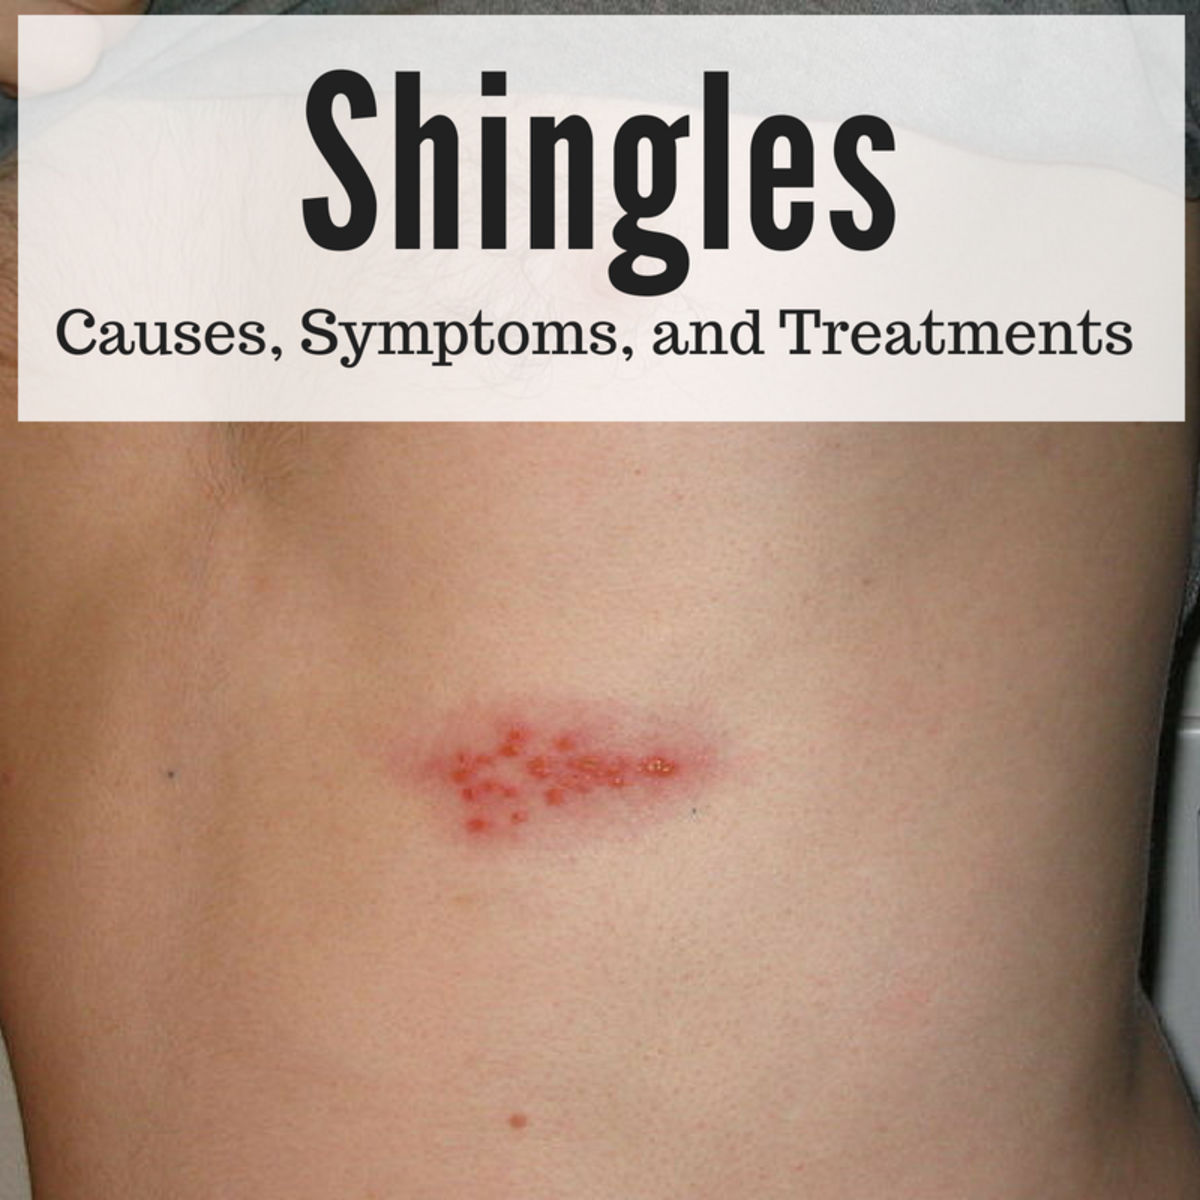 What causes shingles, what are the symptoms, and how is it treated?